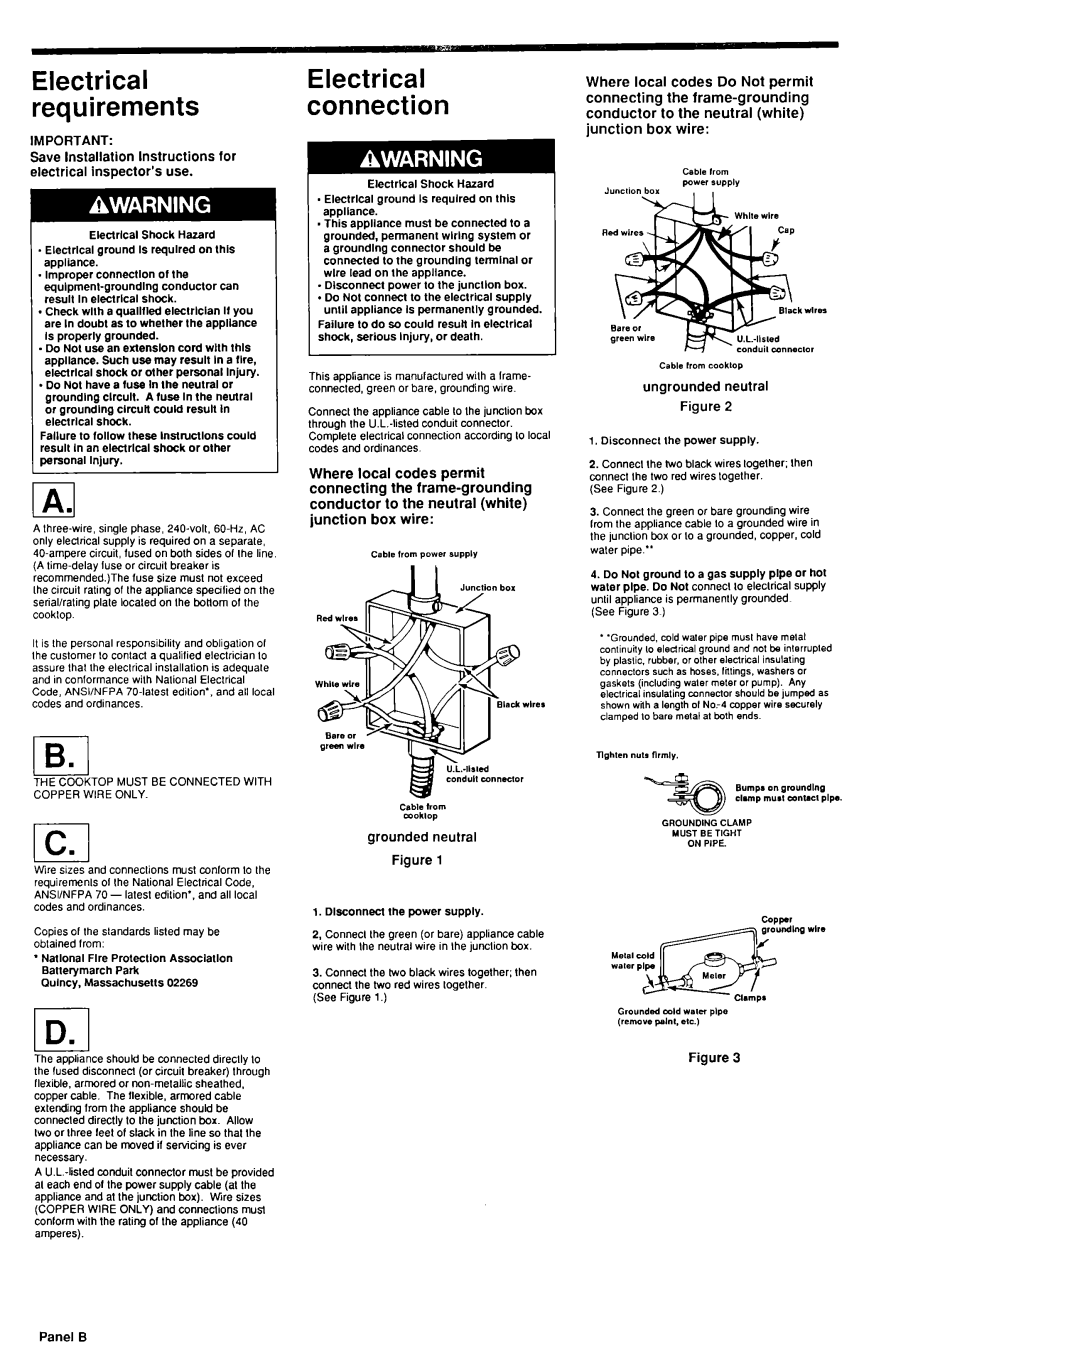 KitchenAid 3181199 E-.l, Electrical connection, Save Installation Instructions for electrical inspector’s use, Panel 